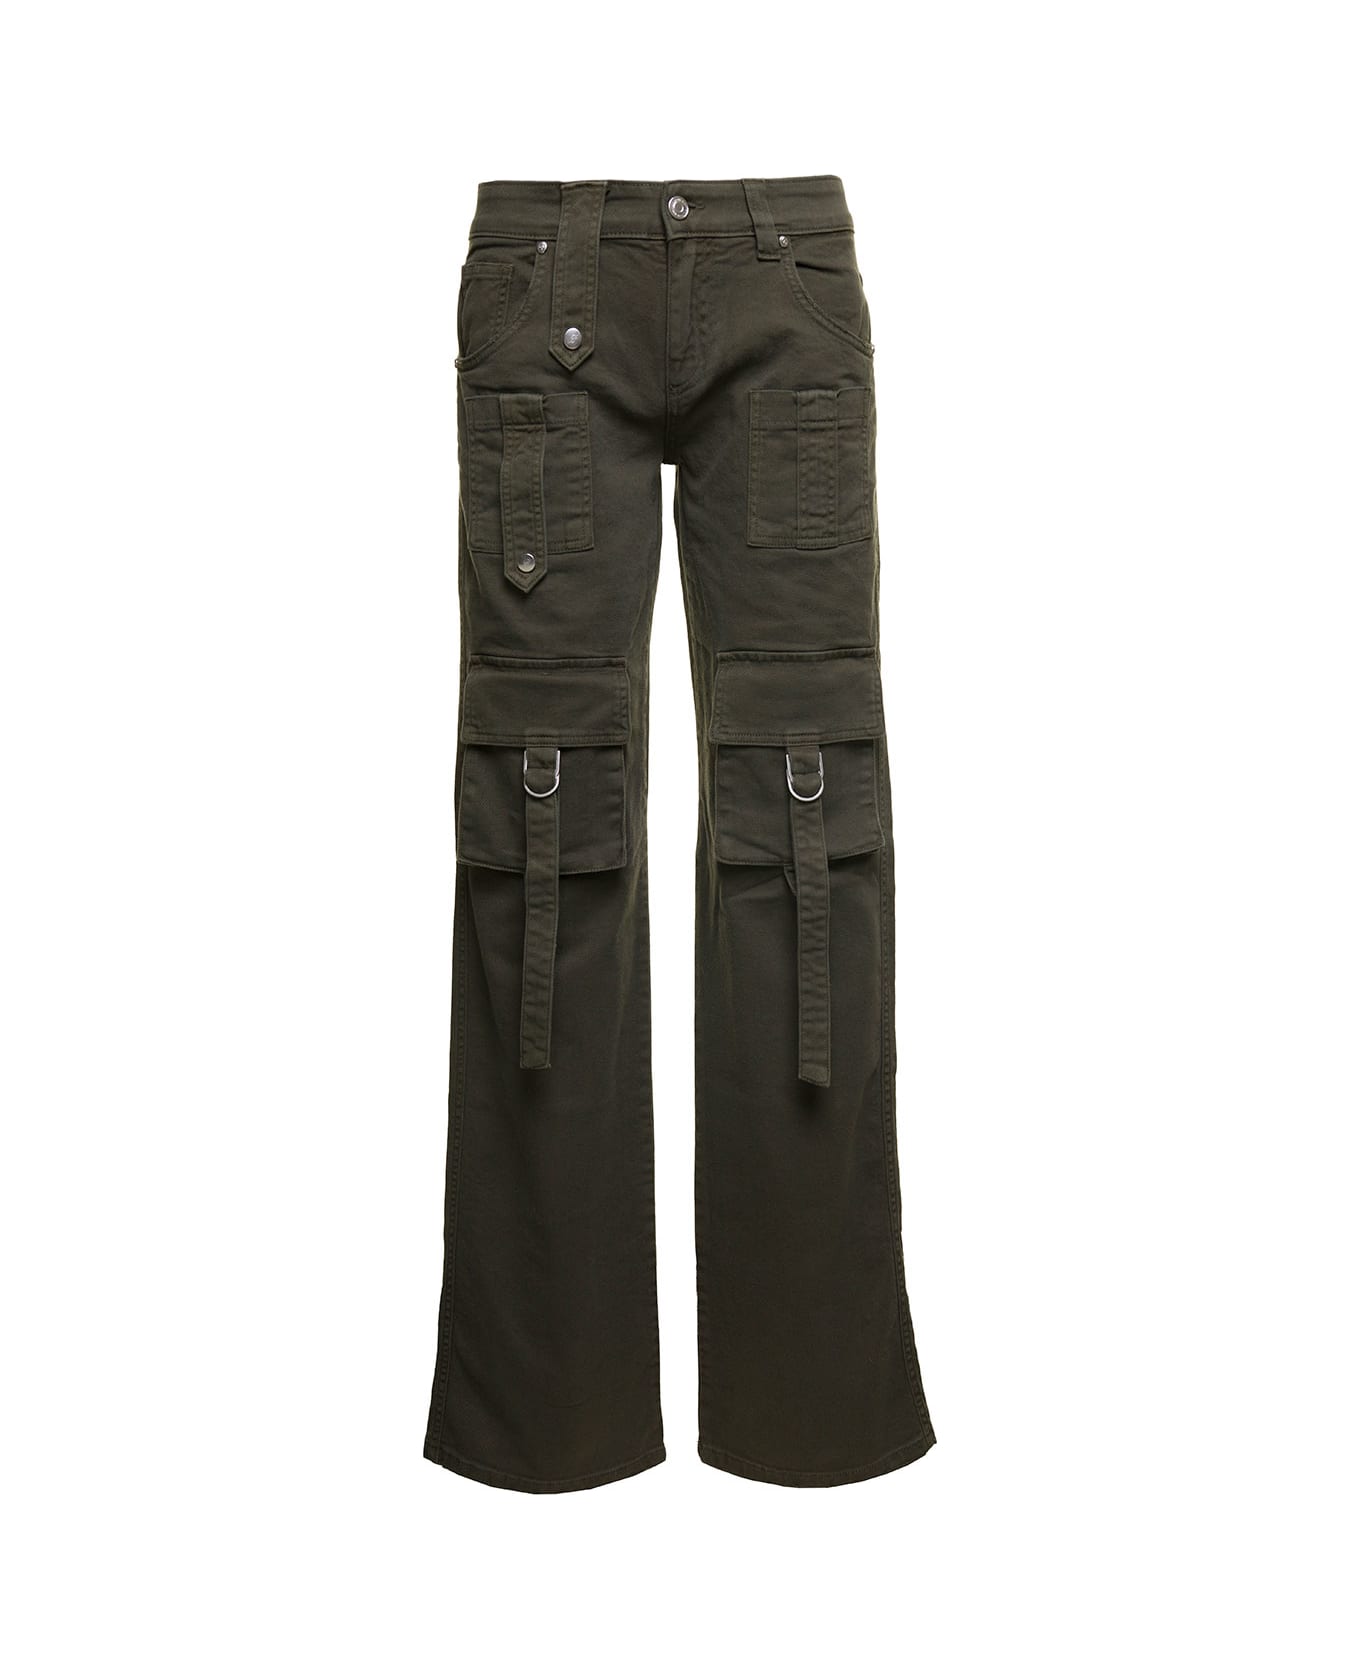 Blumarine Military Green Cargo Jeans With Buckles And Branded Button In Stretch Cotton Denim Woman - Green ボトムス